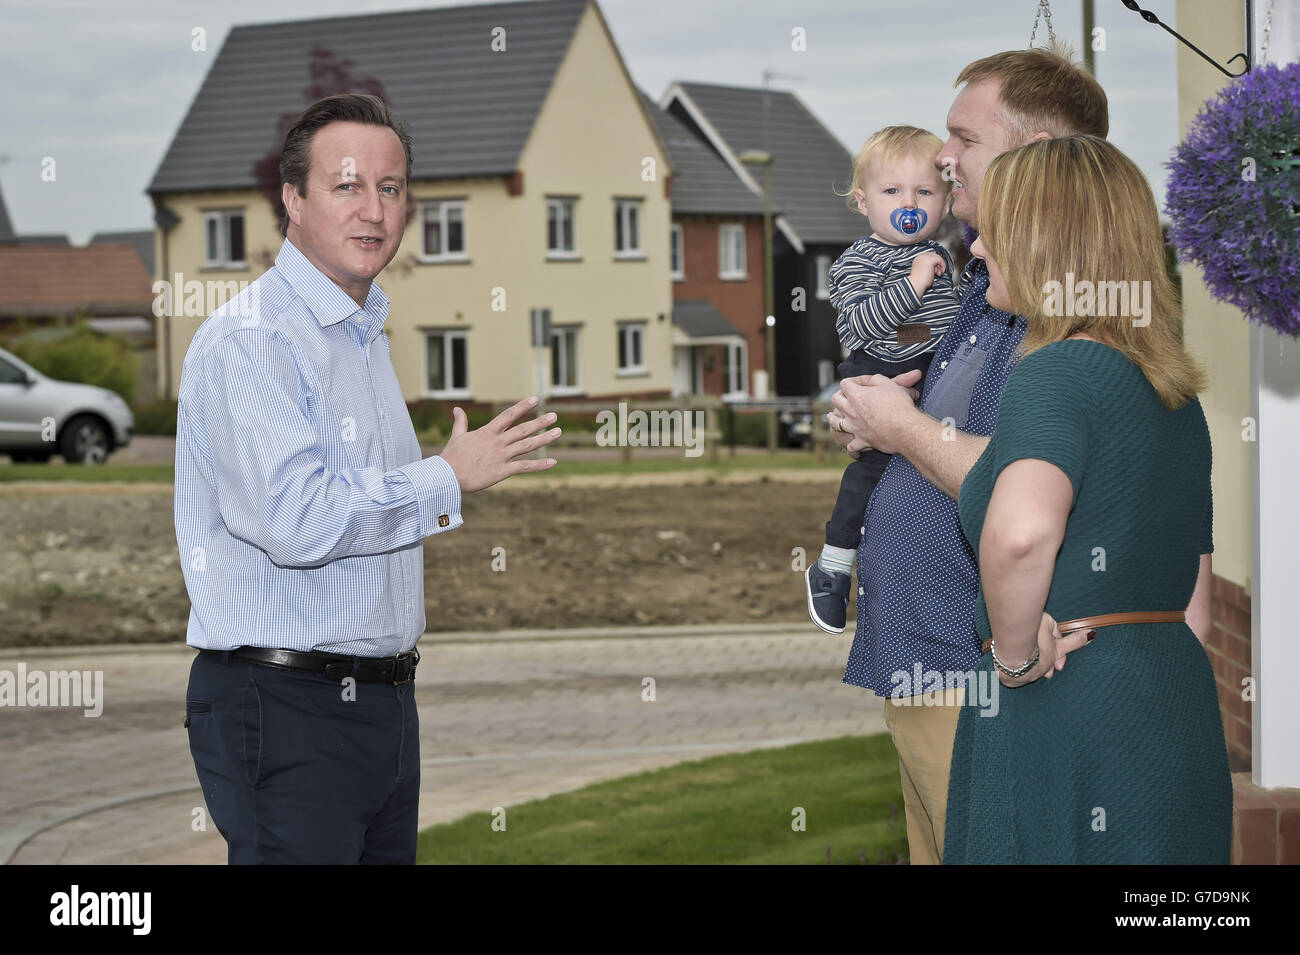 Prime Minister David Cameron meets Barry and Samantha McBeth and their one year old Alfie during a visit to the new Taylor Wimpy Great Western Park housing estate, Didcot, Oxfordshire ahead of the start of the Conservative Party Conference. Stock Photo